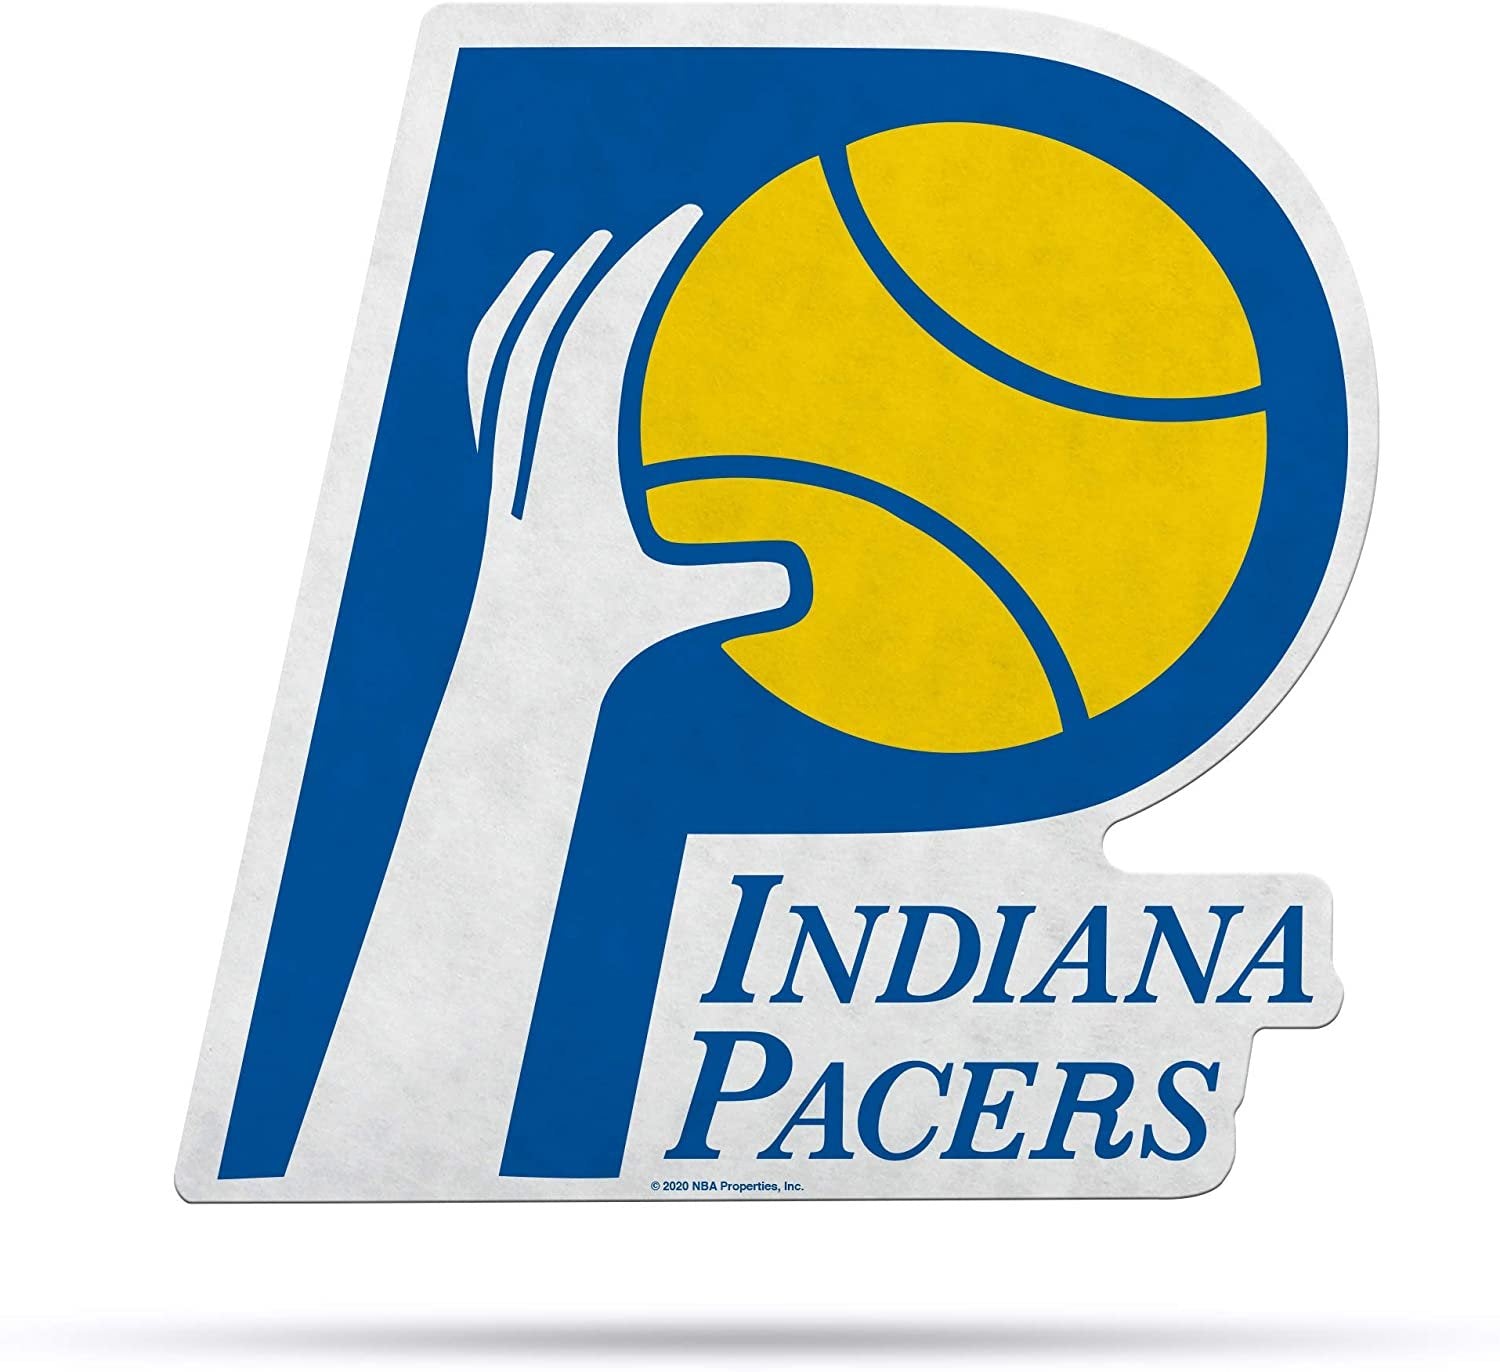 Indiana Pacers Soft Felt Pennant, Retro Design, Shape Cut, 18 Inch, Easy To Hang